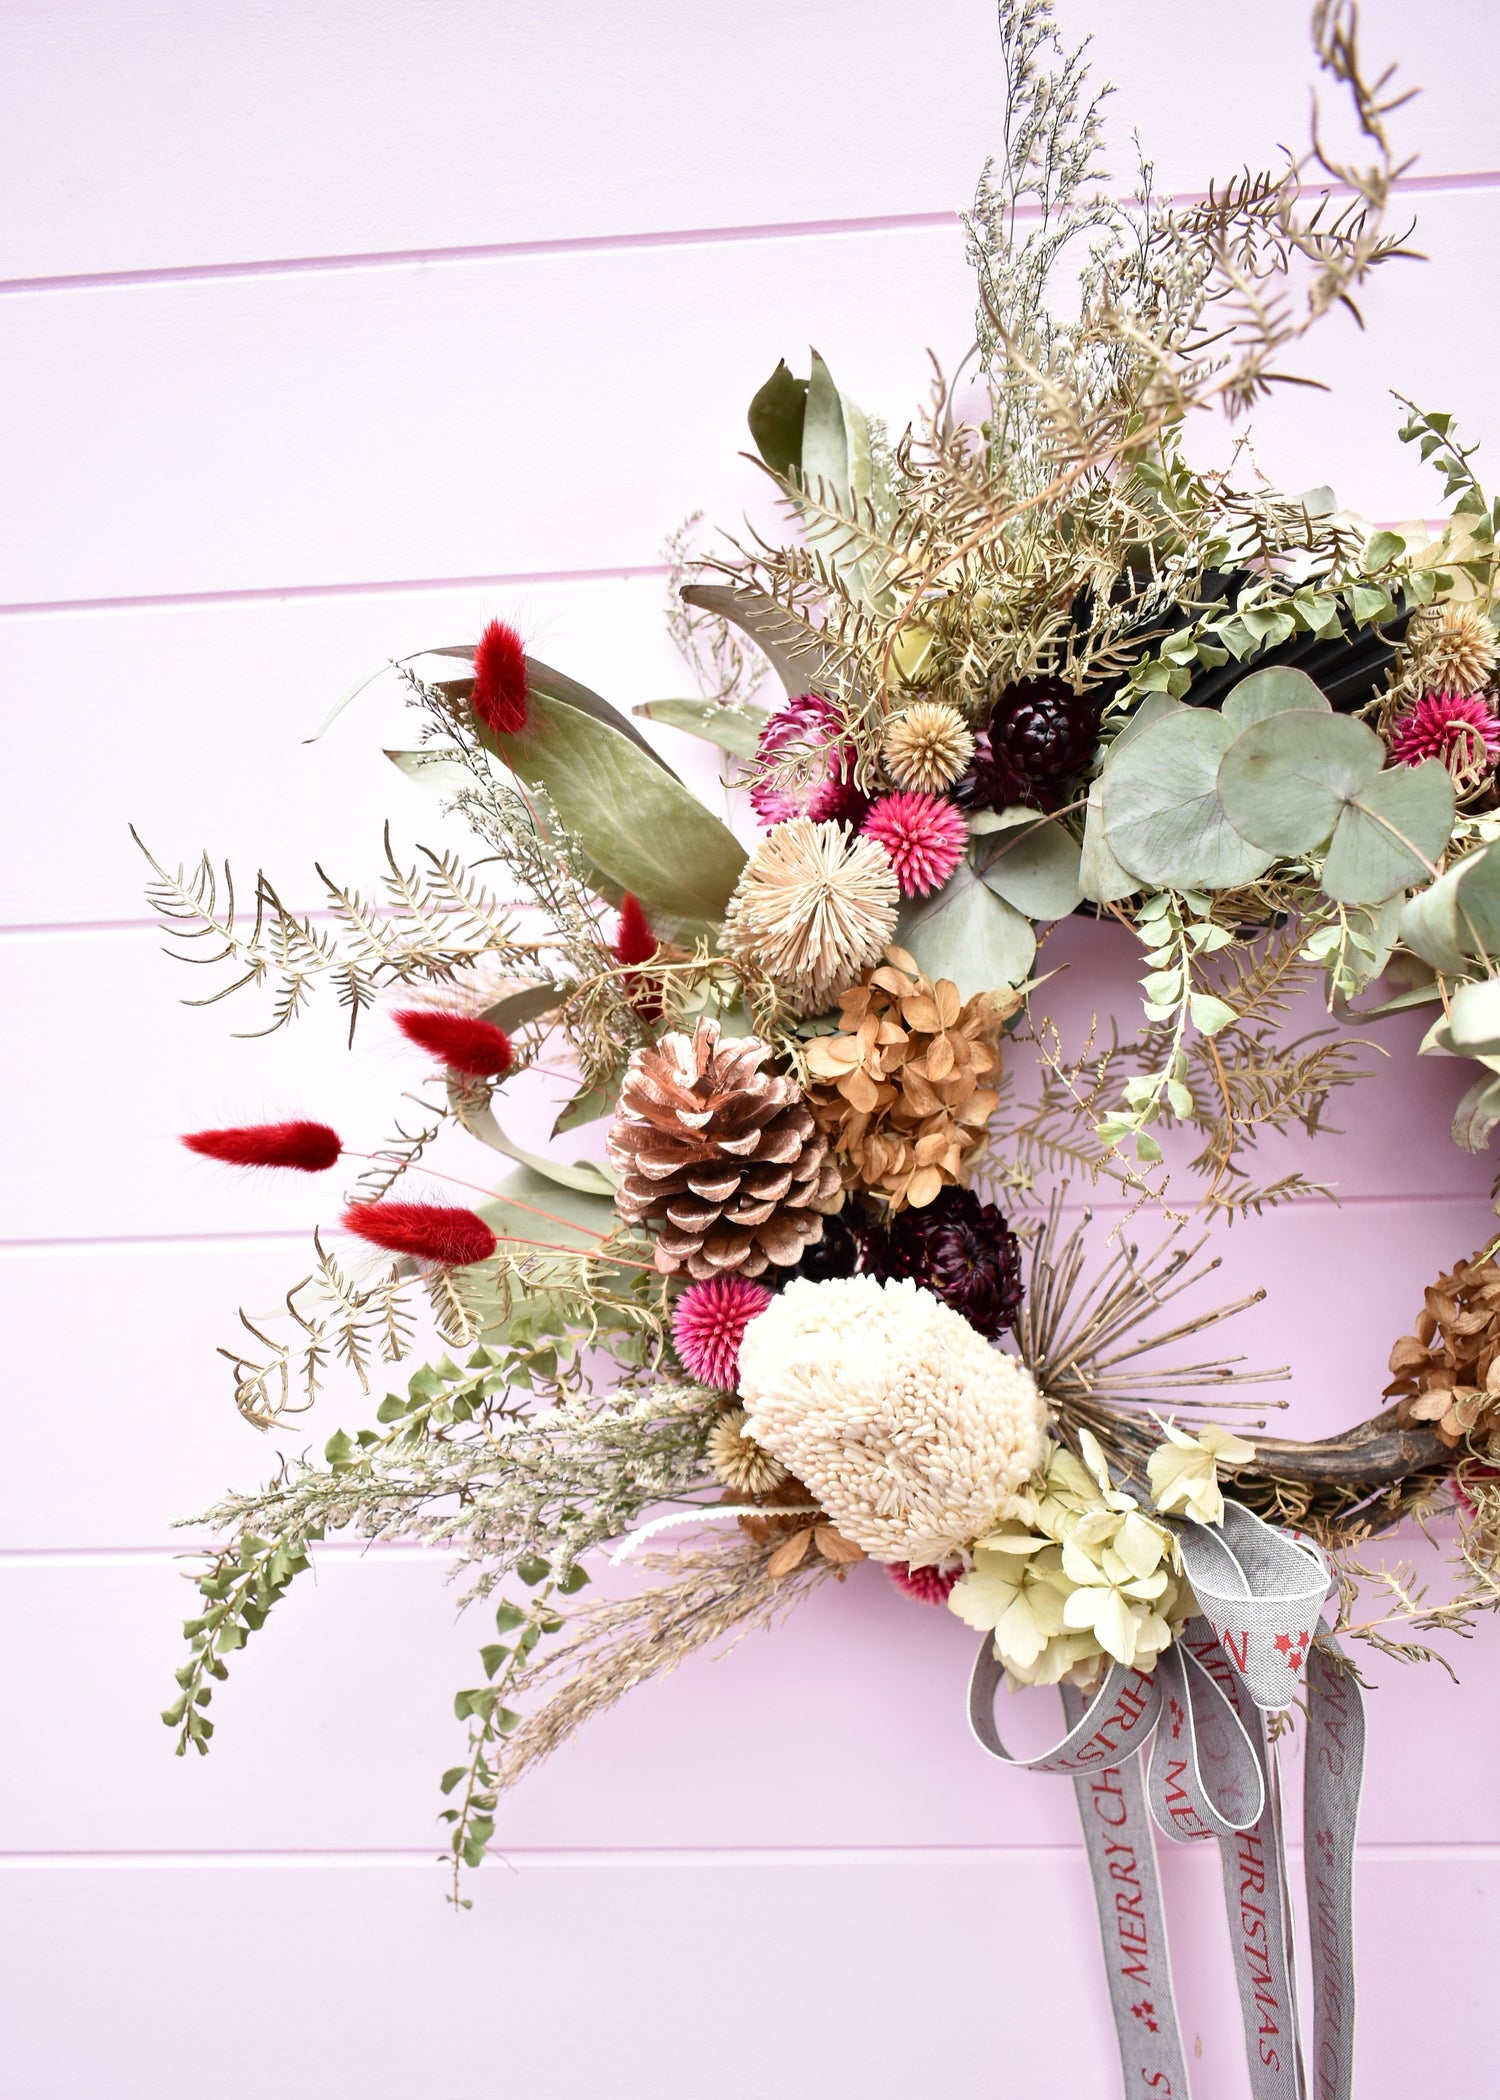 A Christmas wreath made with dried and everlasting flowers. Banksia, eucalyptus, strawflowers, fern and Christmas ribbon. Made by a Florist and on a pink background.